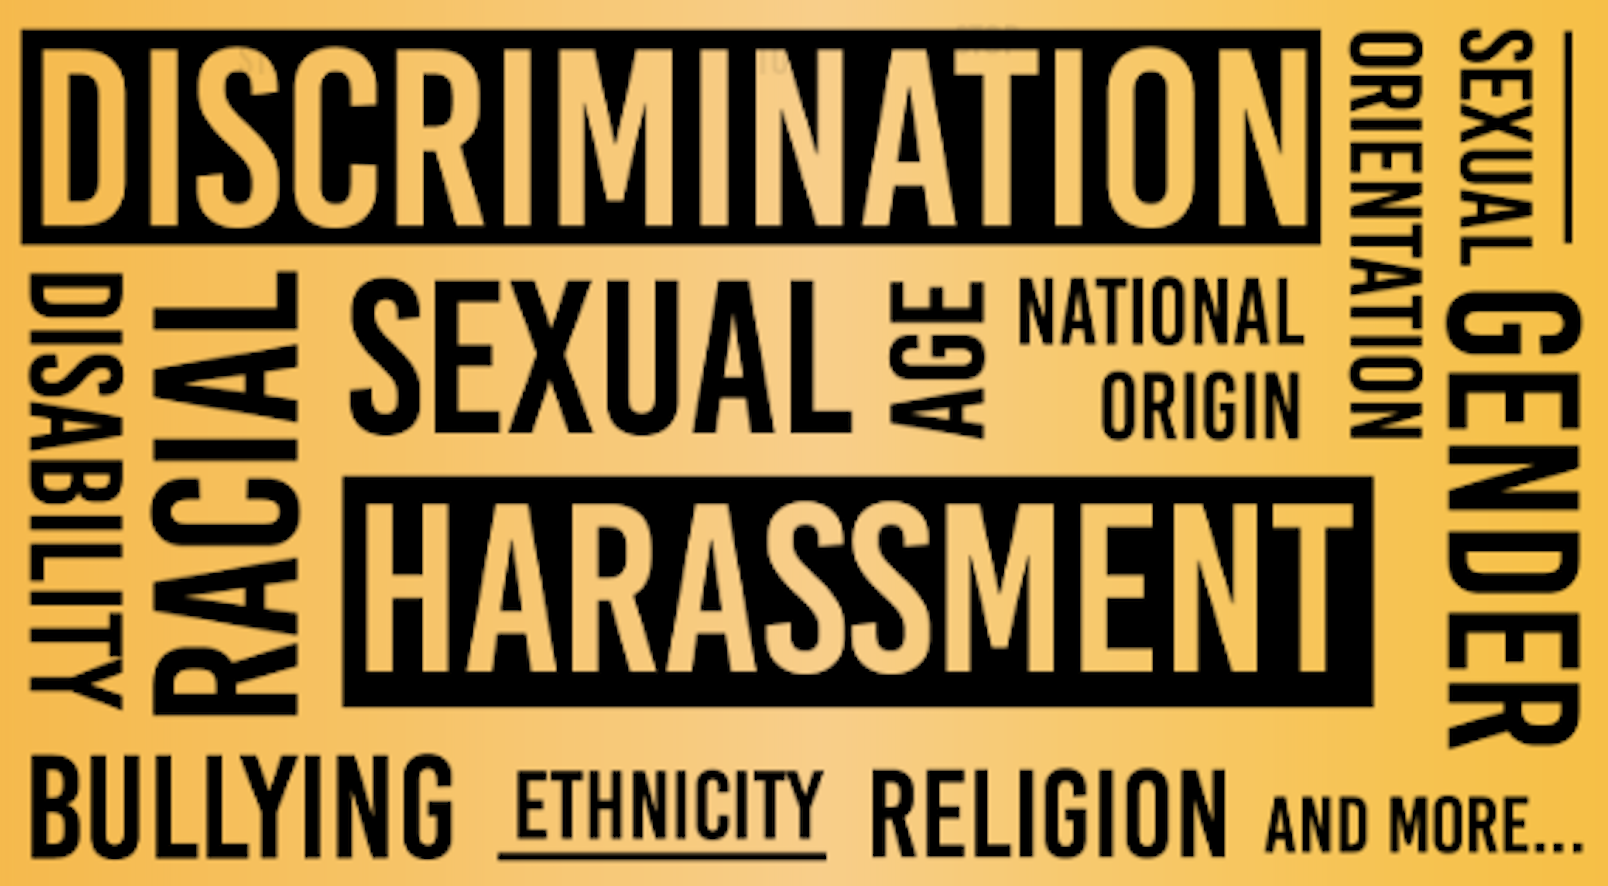 Discrimination-Ethnicity-Disability-Sexual-harrassment-new-banner